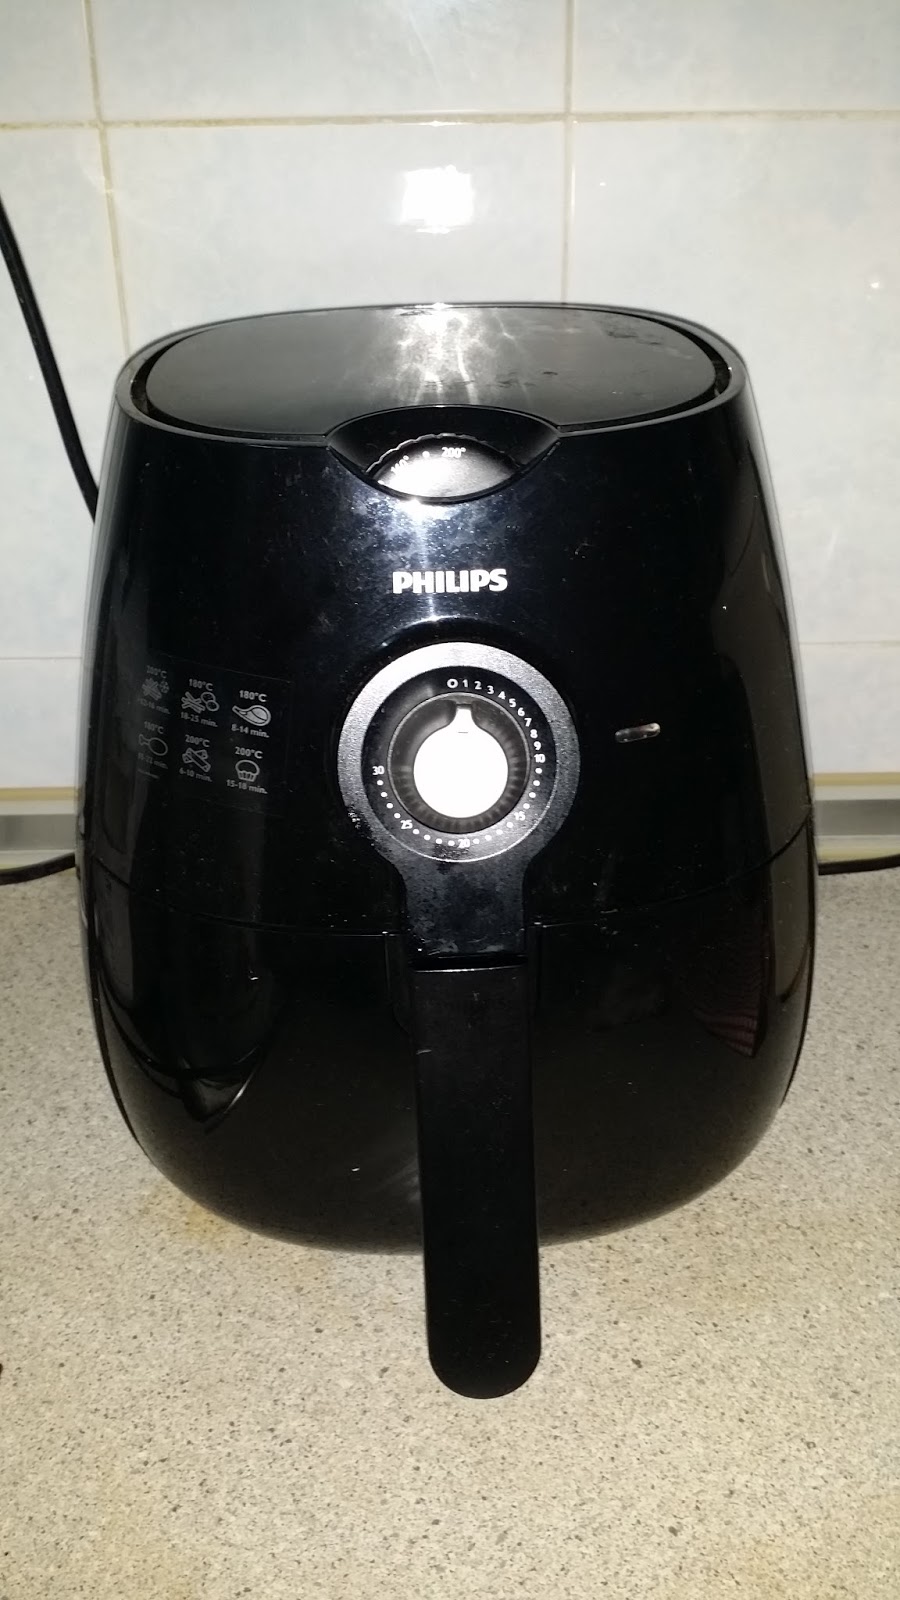 Sharon and her adventures...: My Very Bad with Philips Air Fryer HD9220 - Will it Cause Cancer?